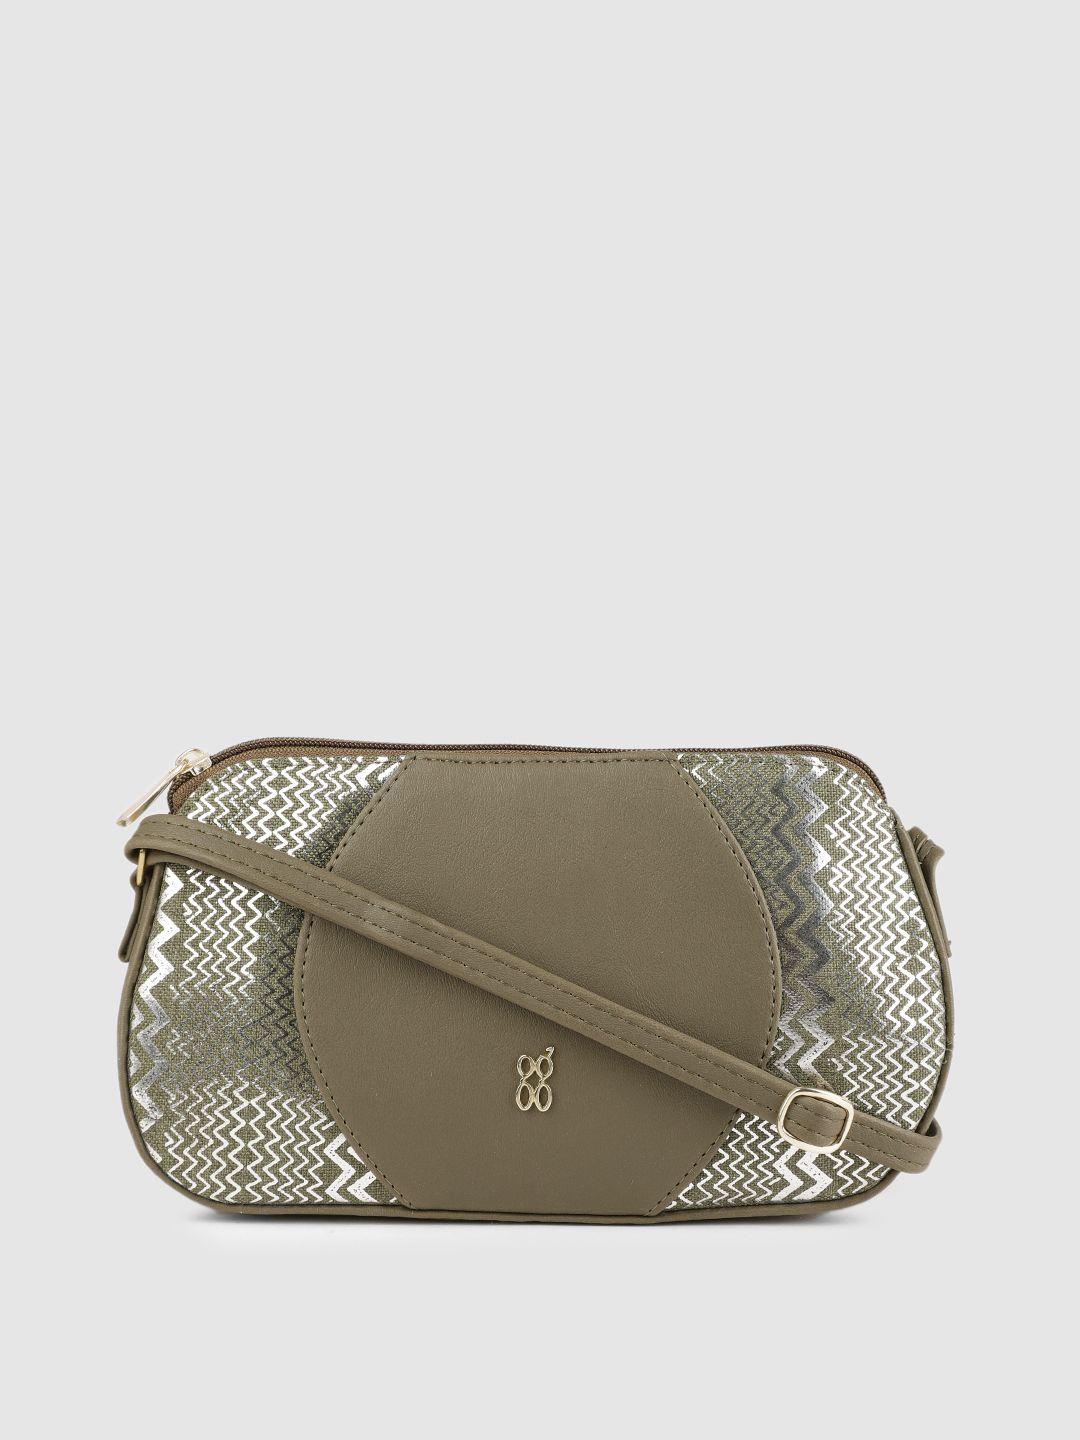 baggit olive green & silver chevron printed structured sling bag